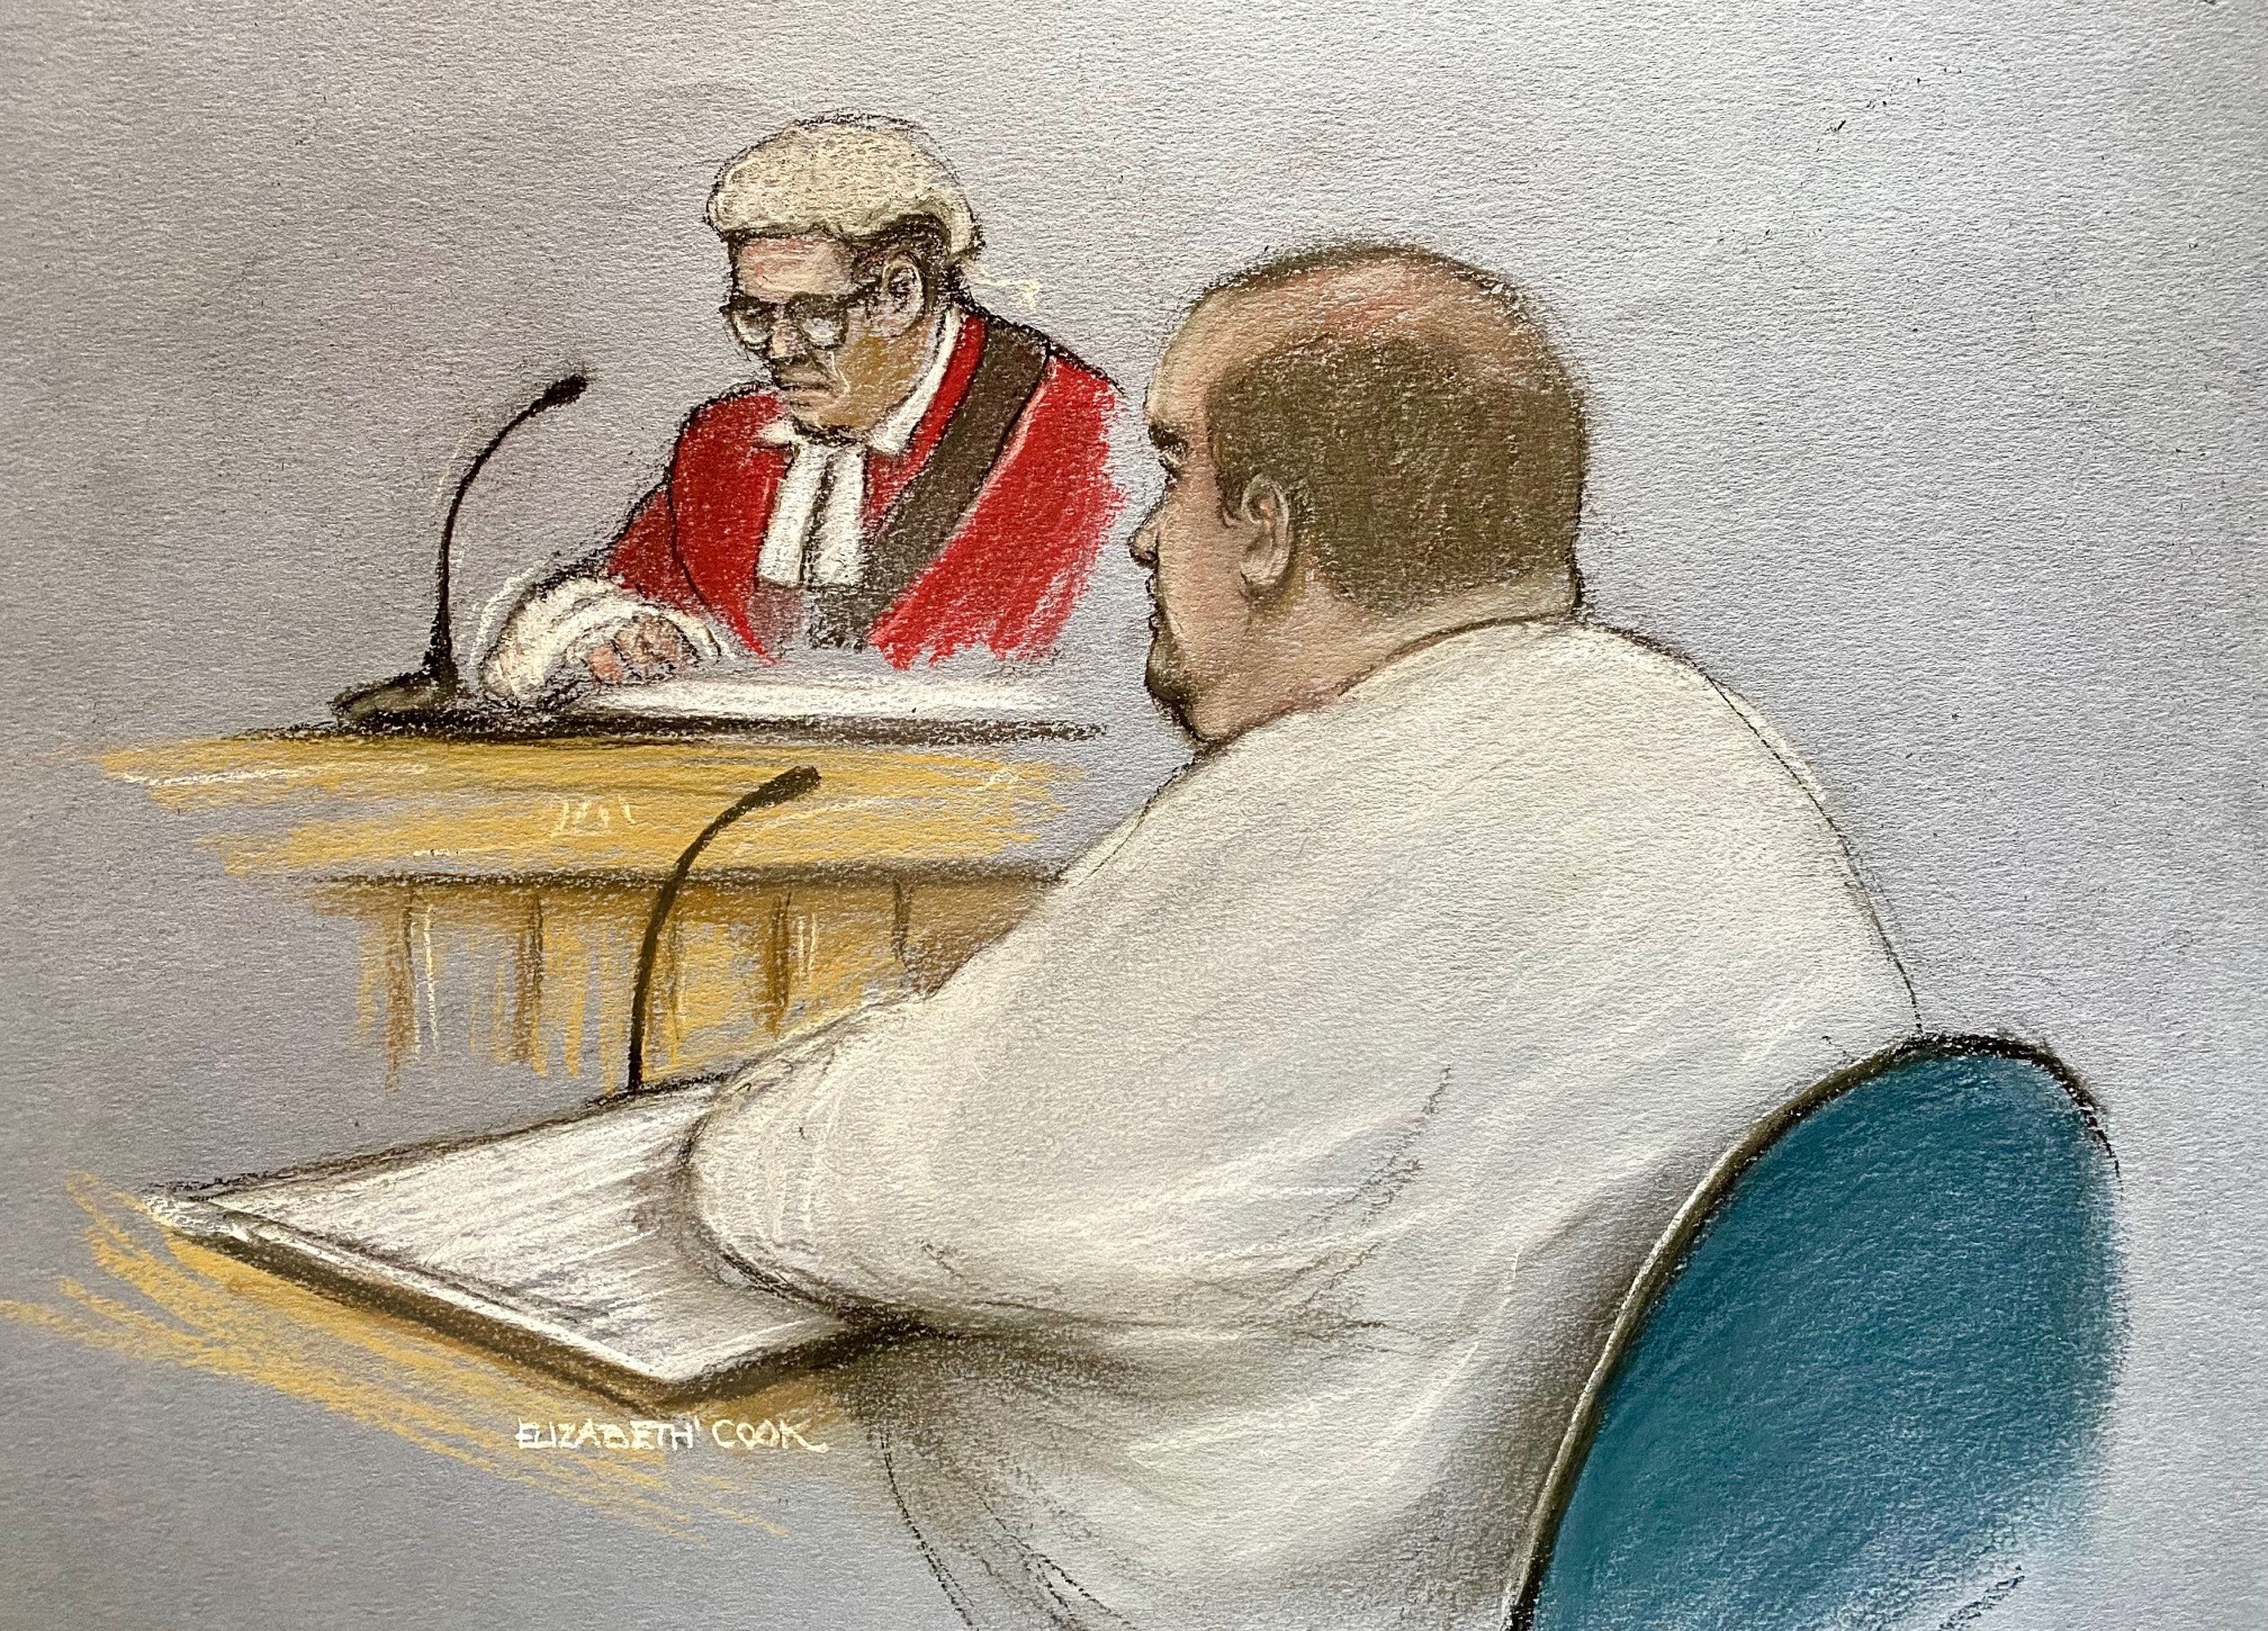 Plumb previously told jurors his messages were ‘just chatting’ and ‘fantasy’ (Elizabeth Cook/PA)